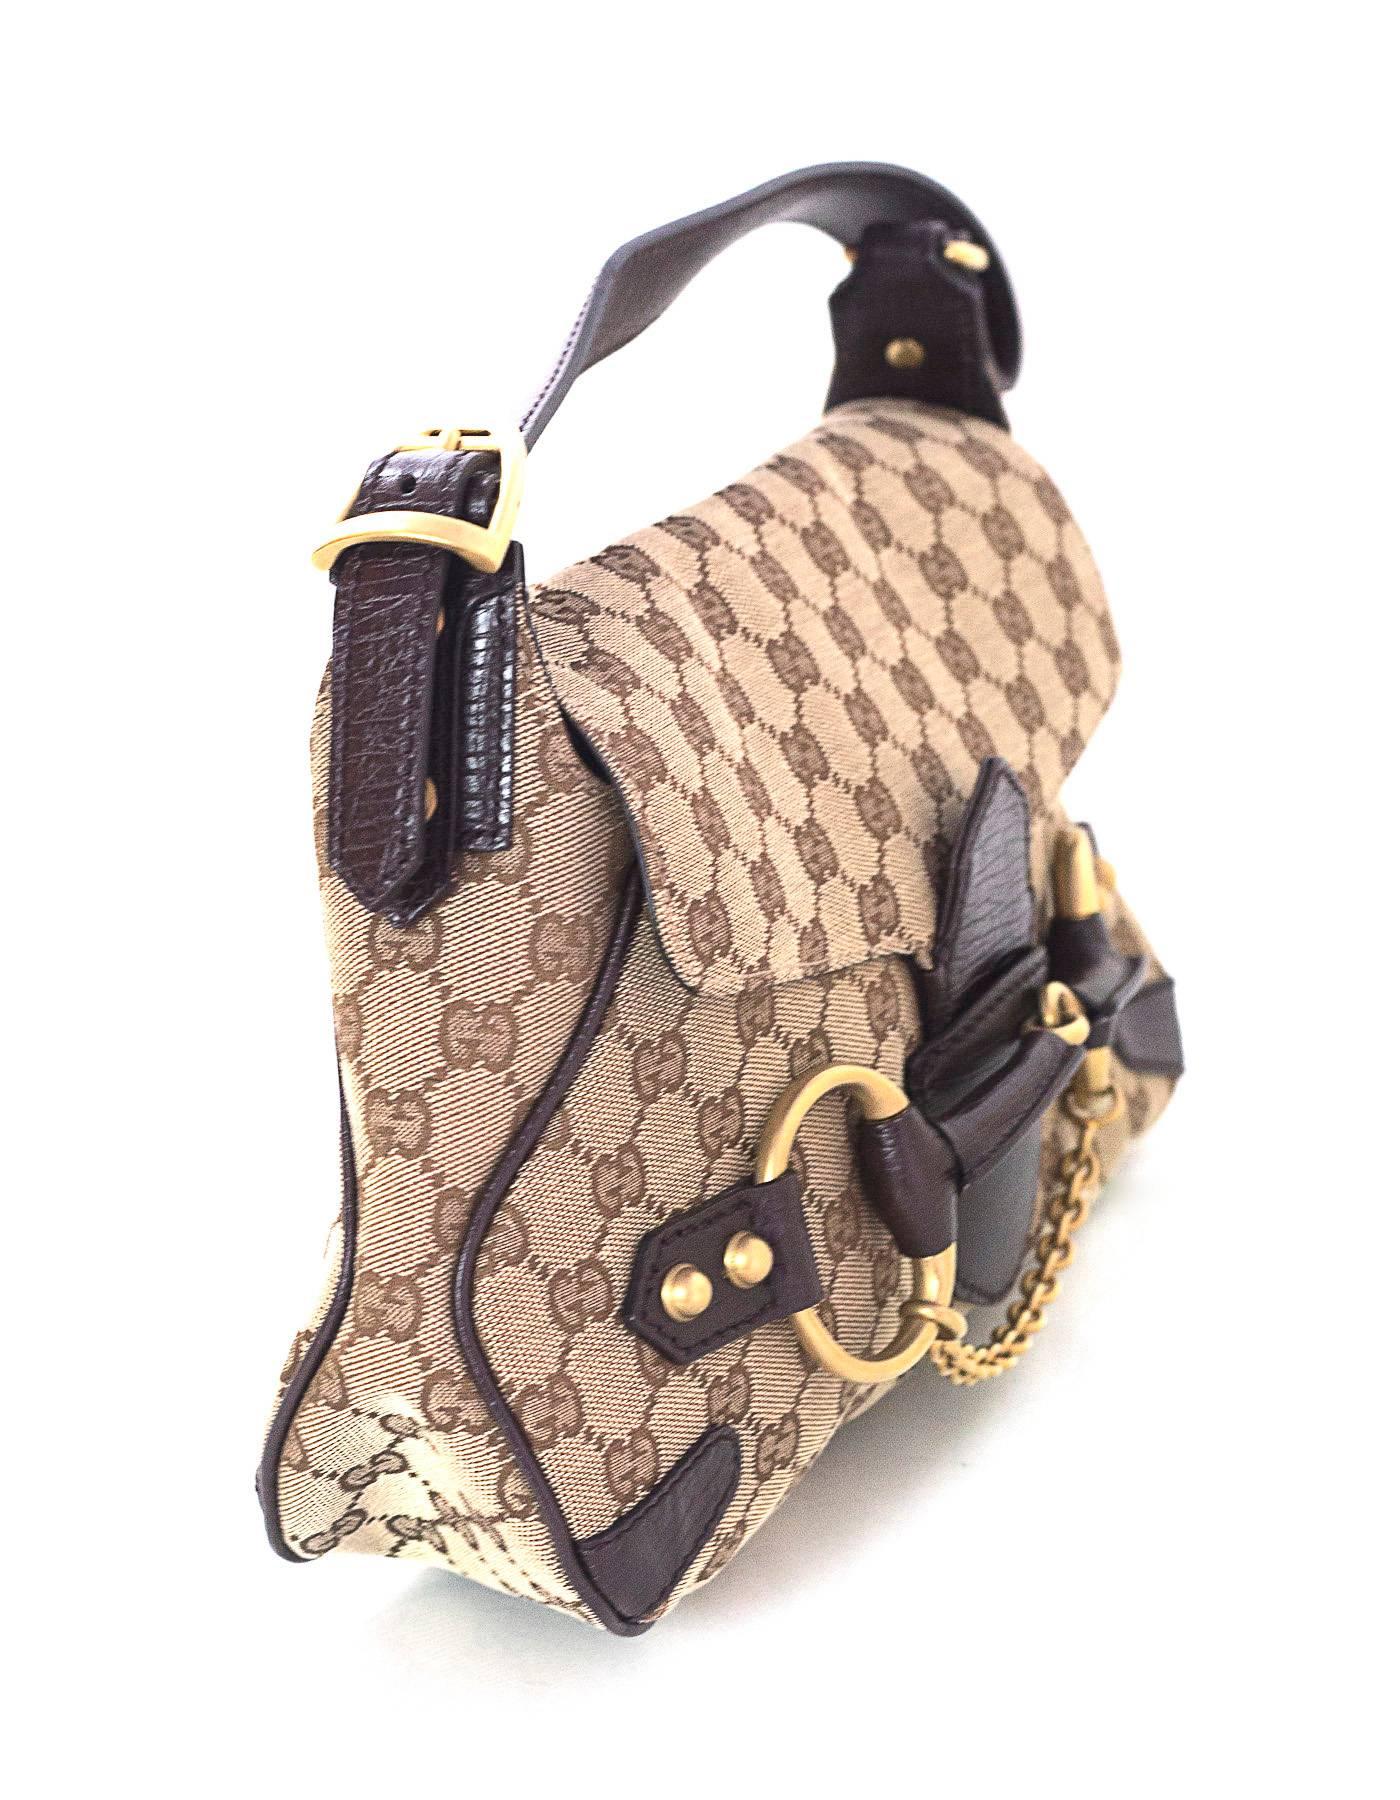 Gucci Monogram Horsebit Flap Bag 
Features adjustable shoulder strap

Made In: Italy
Color: Brown
Hardware: Goldtone
Materials: Canvas and leather
Lining: Brown canvas and leather
Closure/Opening: Flap top with leather arm that slides into